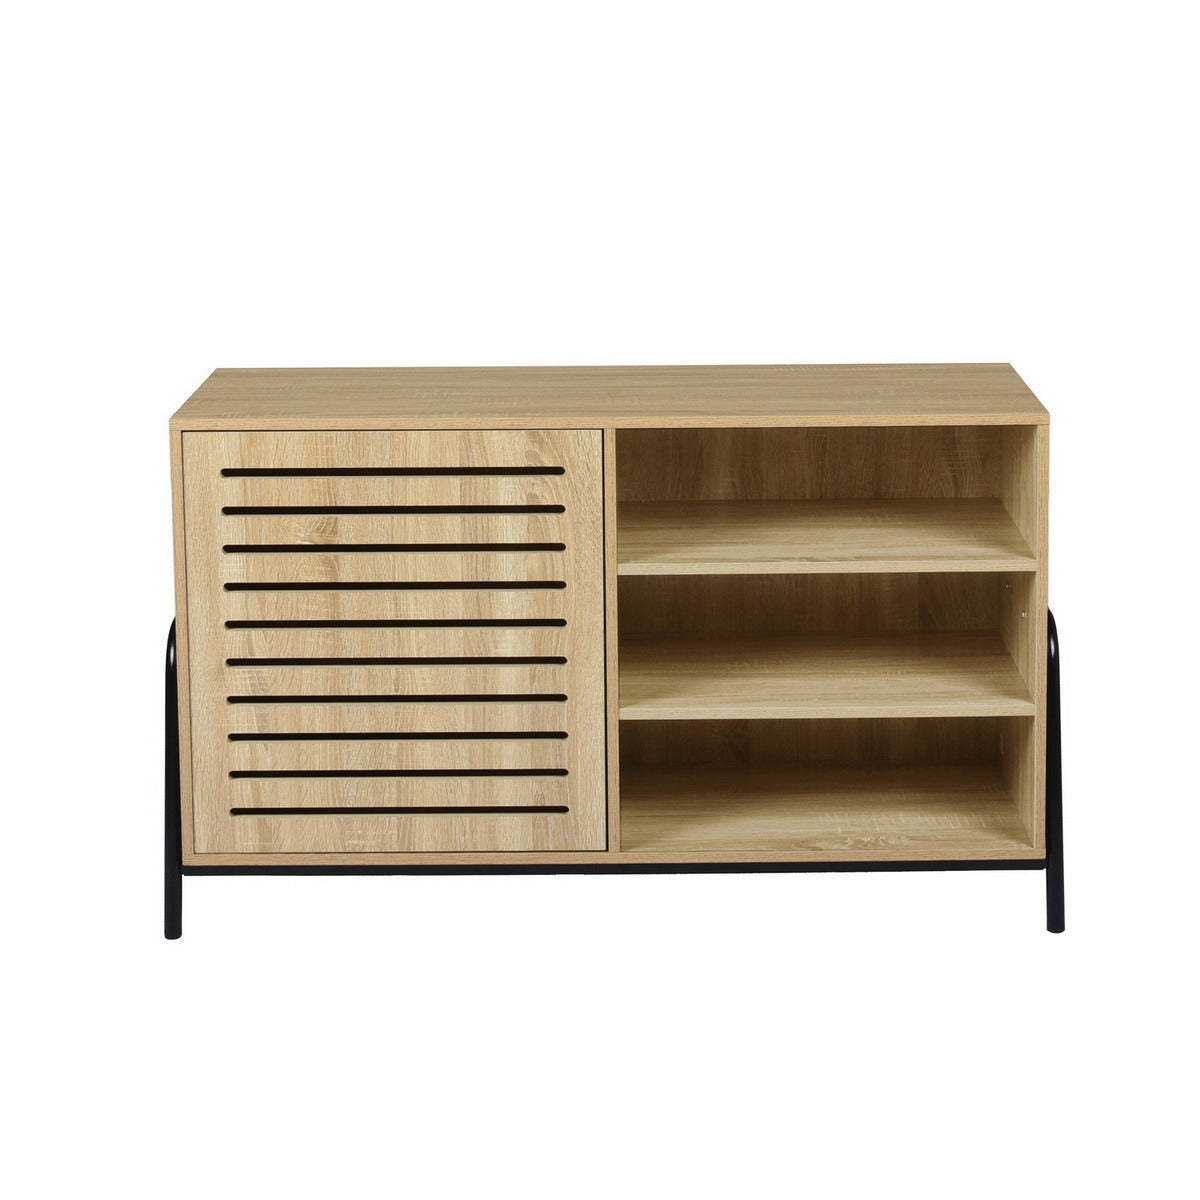 Sideboard Open Door Cabinet with Three Shelves Storage for Kitchen & Dining Storage